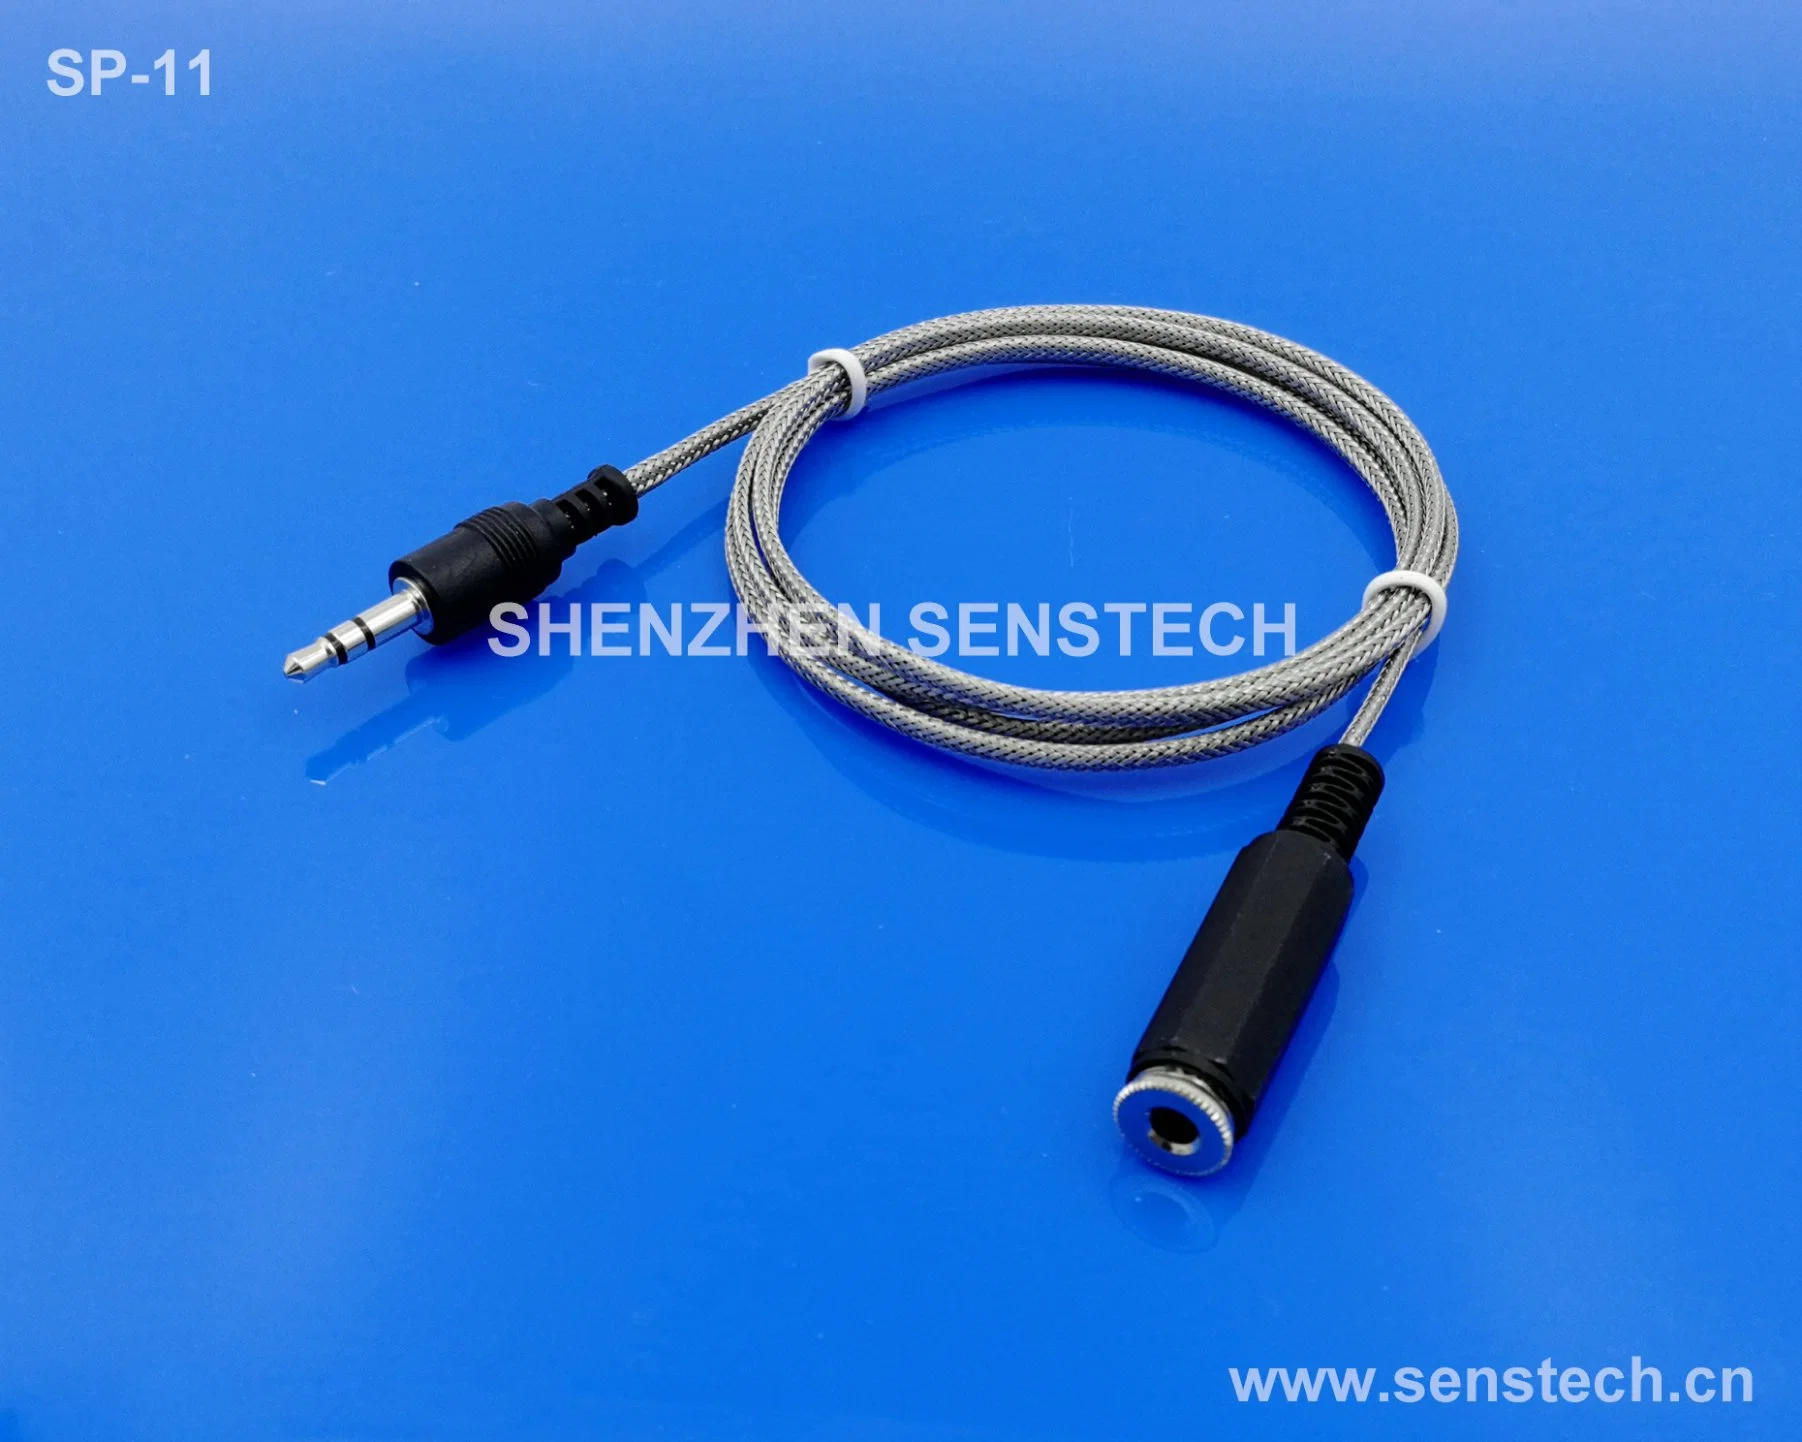 Sp-11 Audio Plug Stainless Steel Connection Cable for Digital Sensor